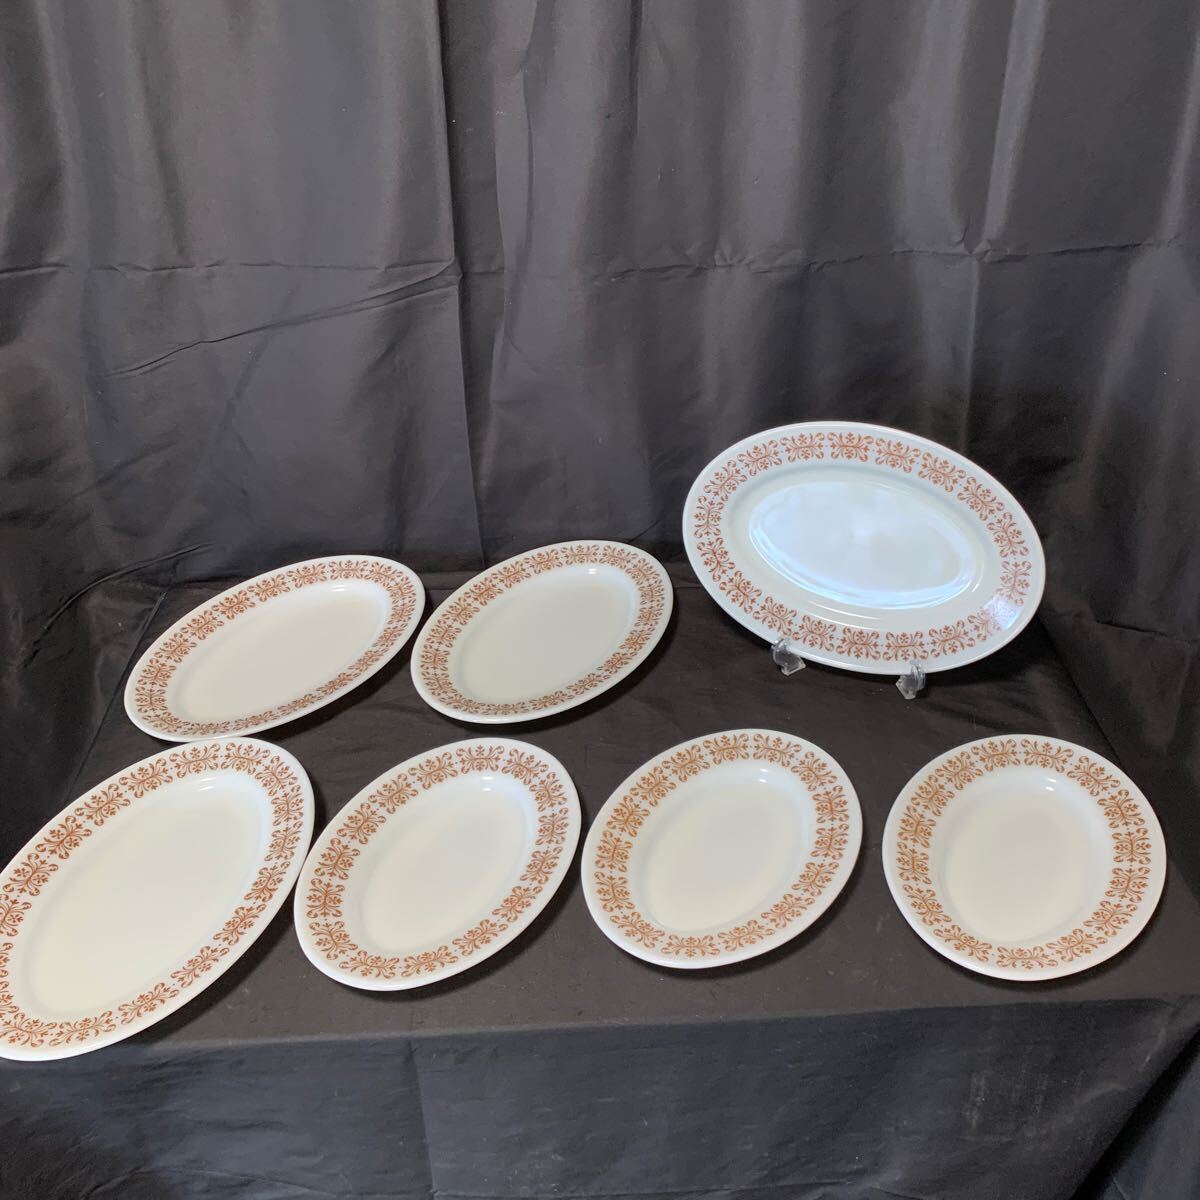 PYREX Pyrex plate 7 sheets summarize 2 size copper fili Gree oval plate . plate America Vintage tableware 